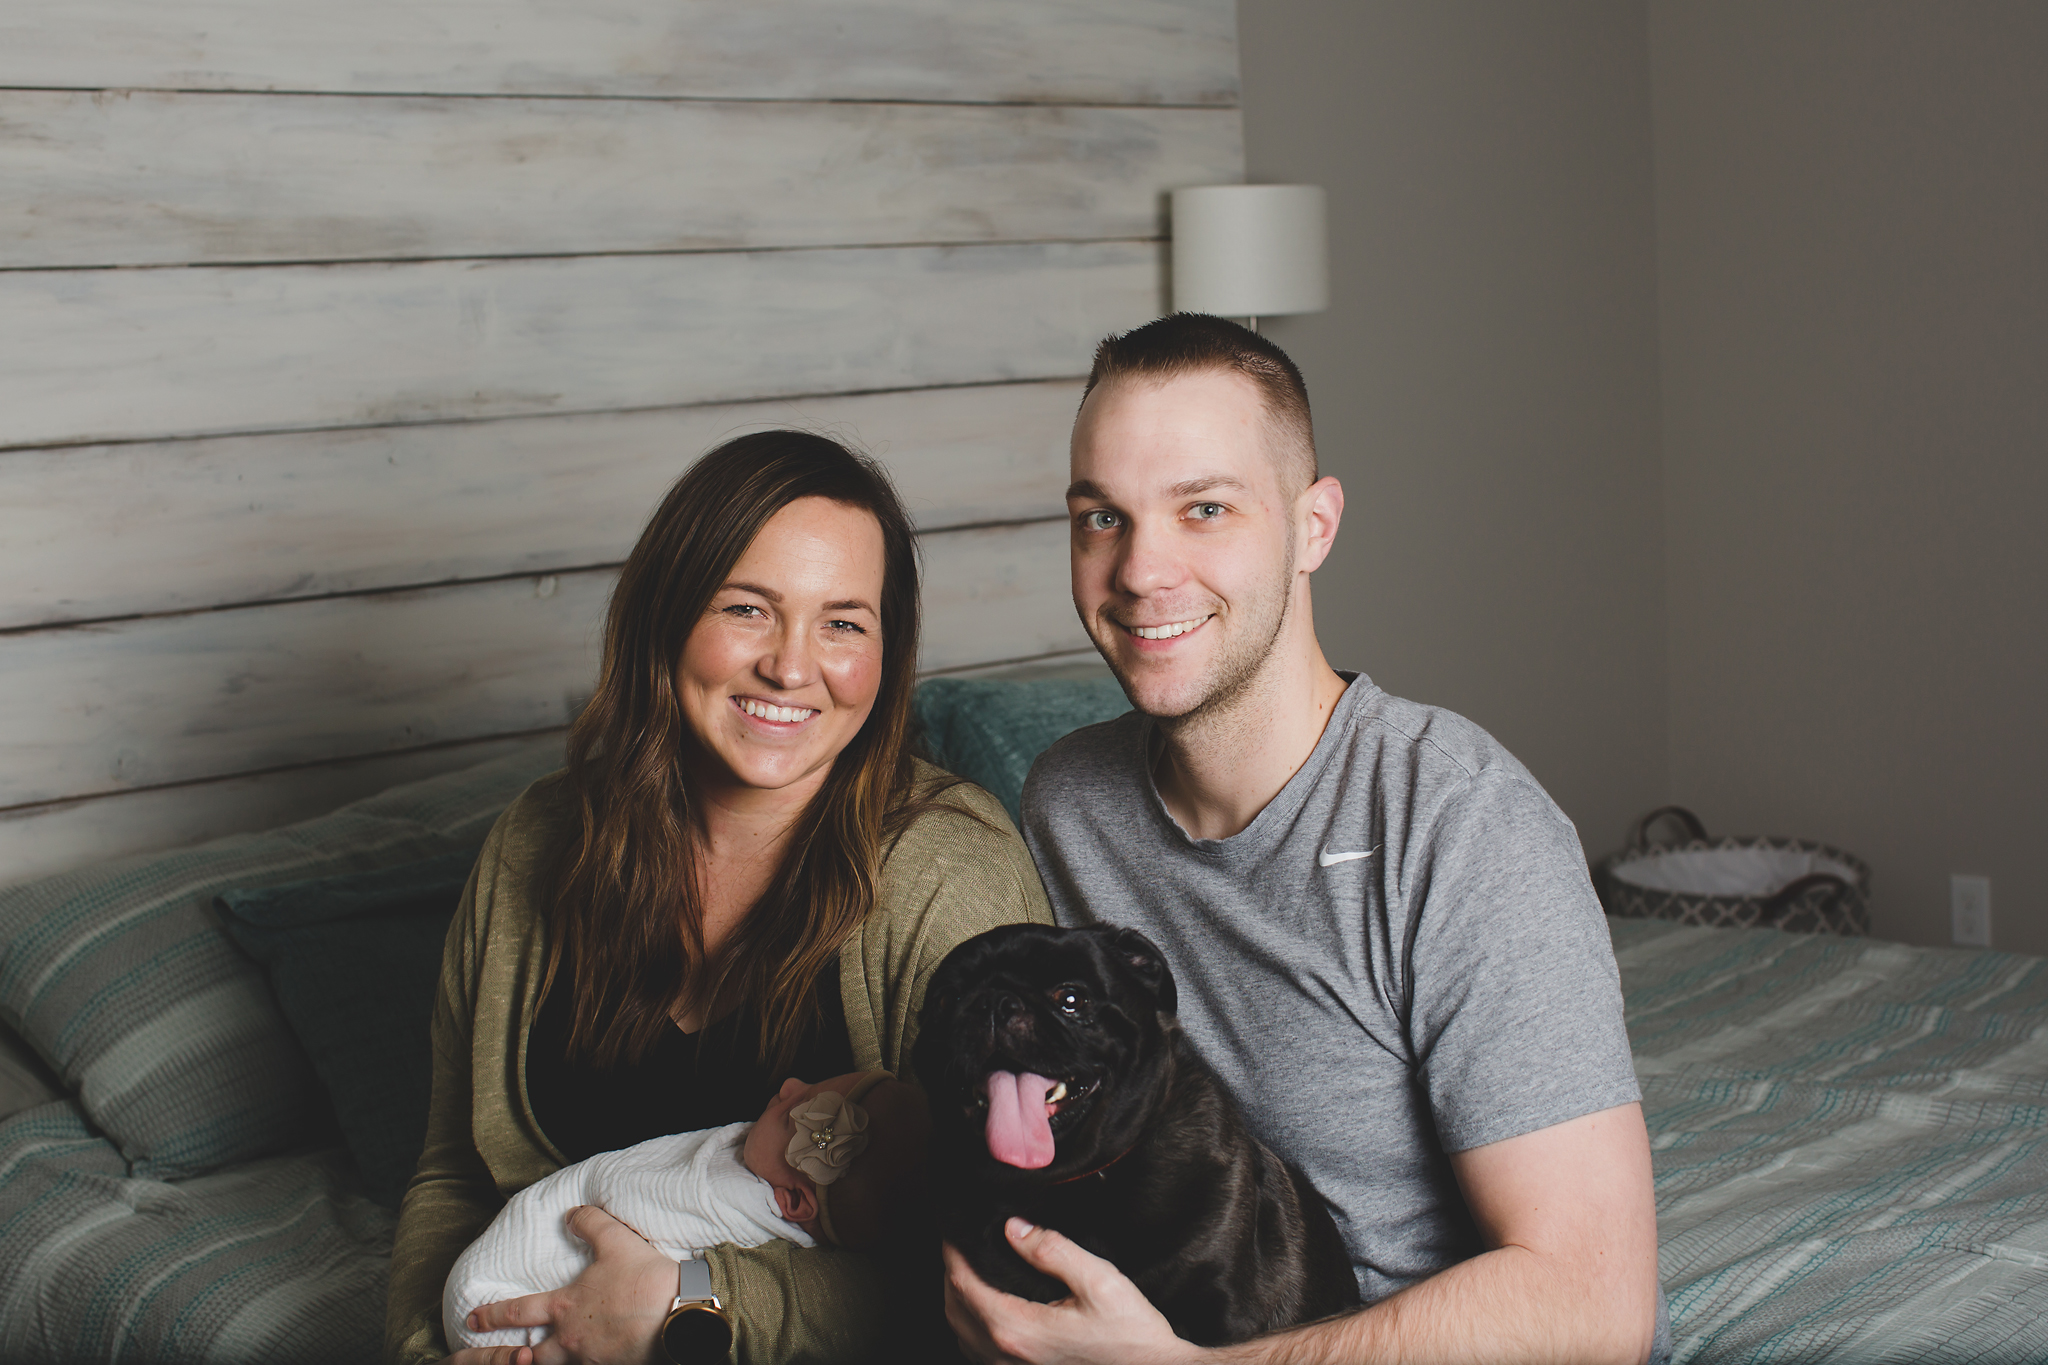 Baby Myla lifestyle newborn session at home with her parents and dog